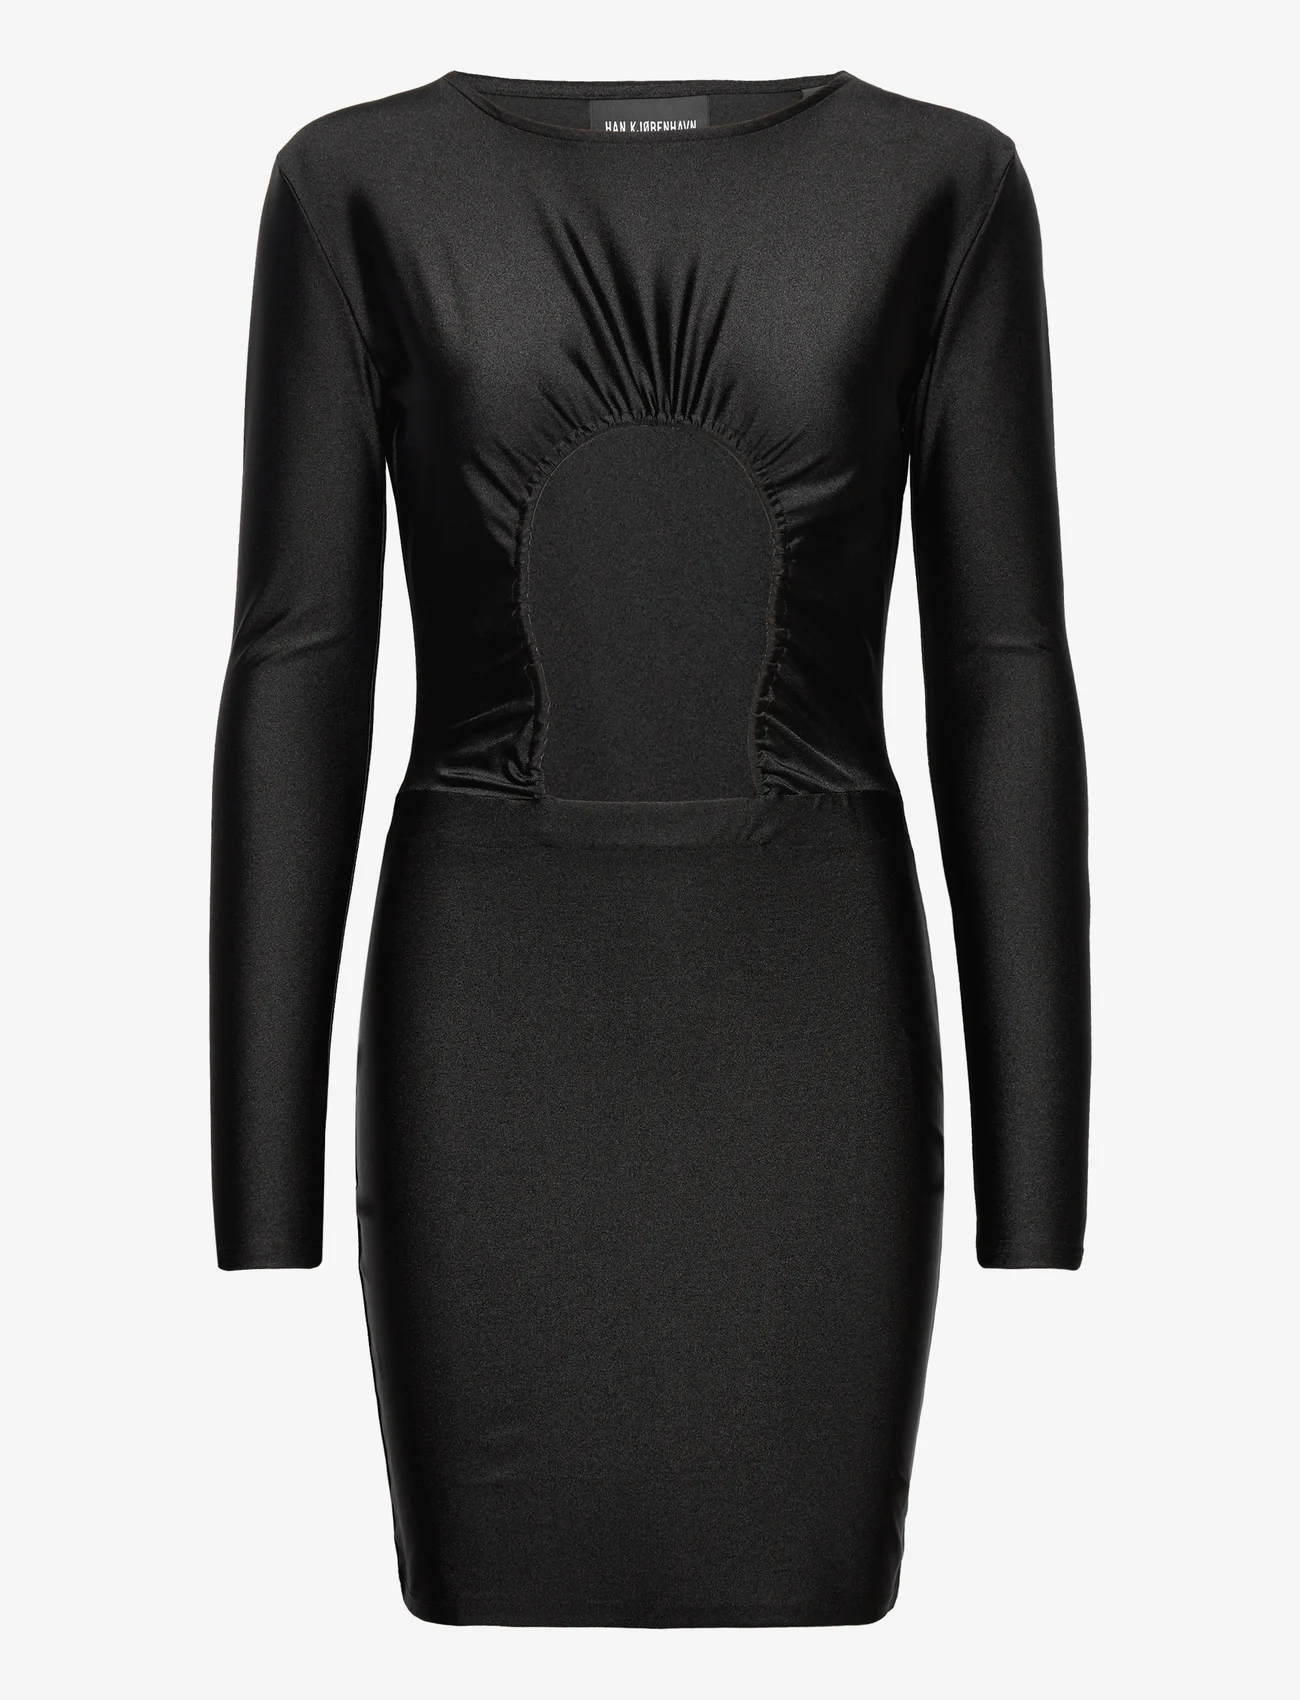 HAN Kjøbenhavn - Stretch Jersey Ruche Cut Out Dress - party wear at outlet prices - black - 0